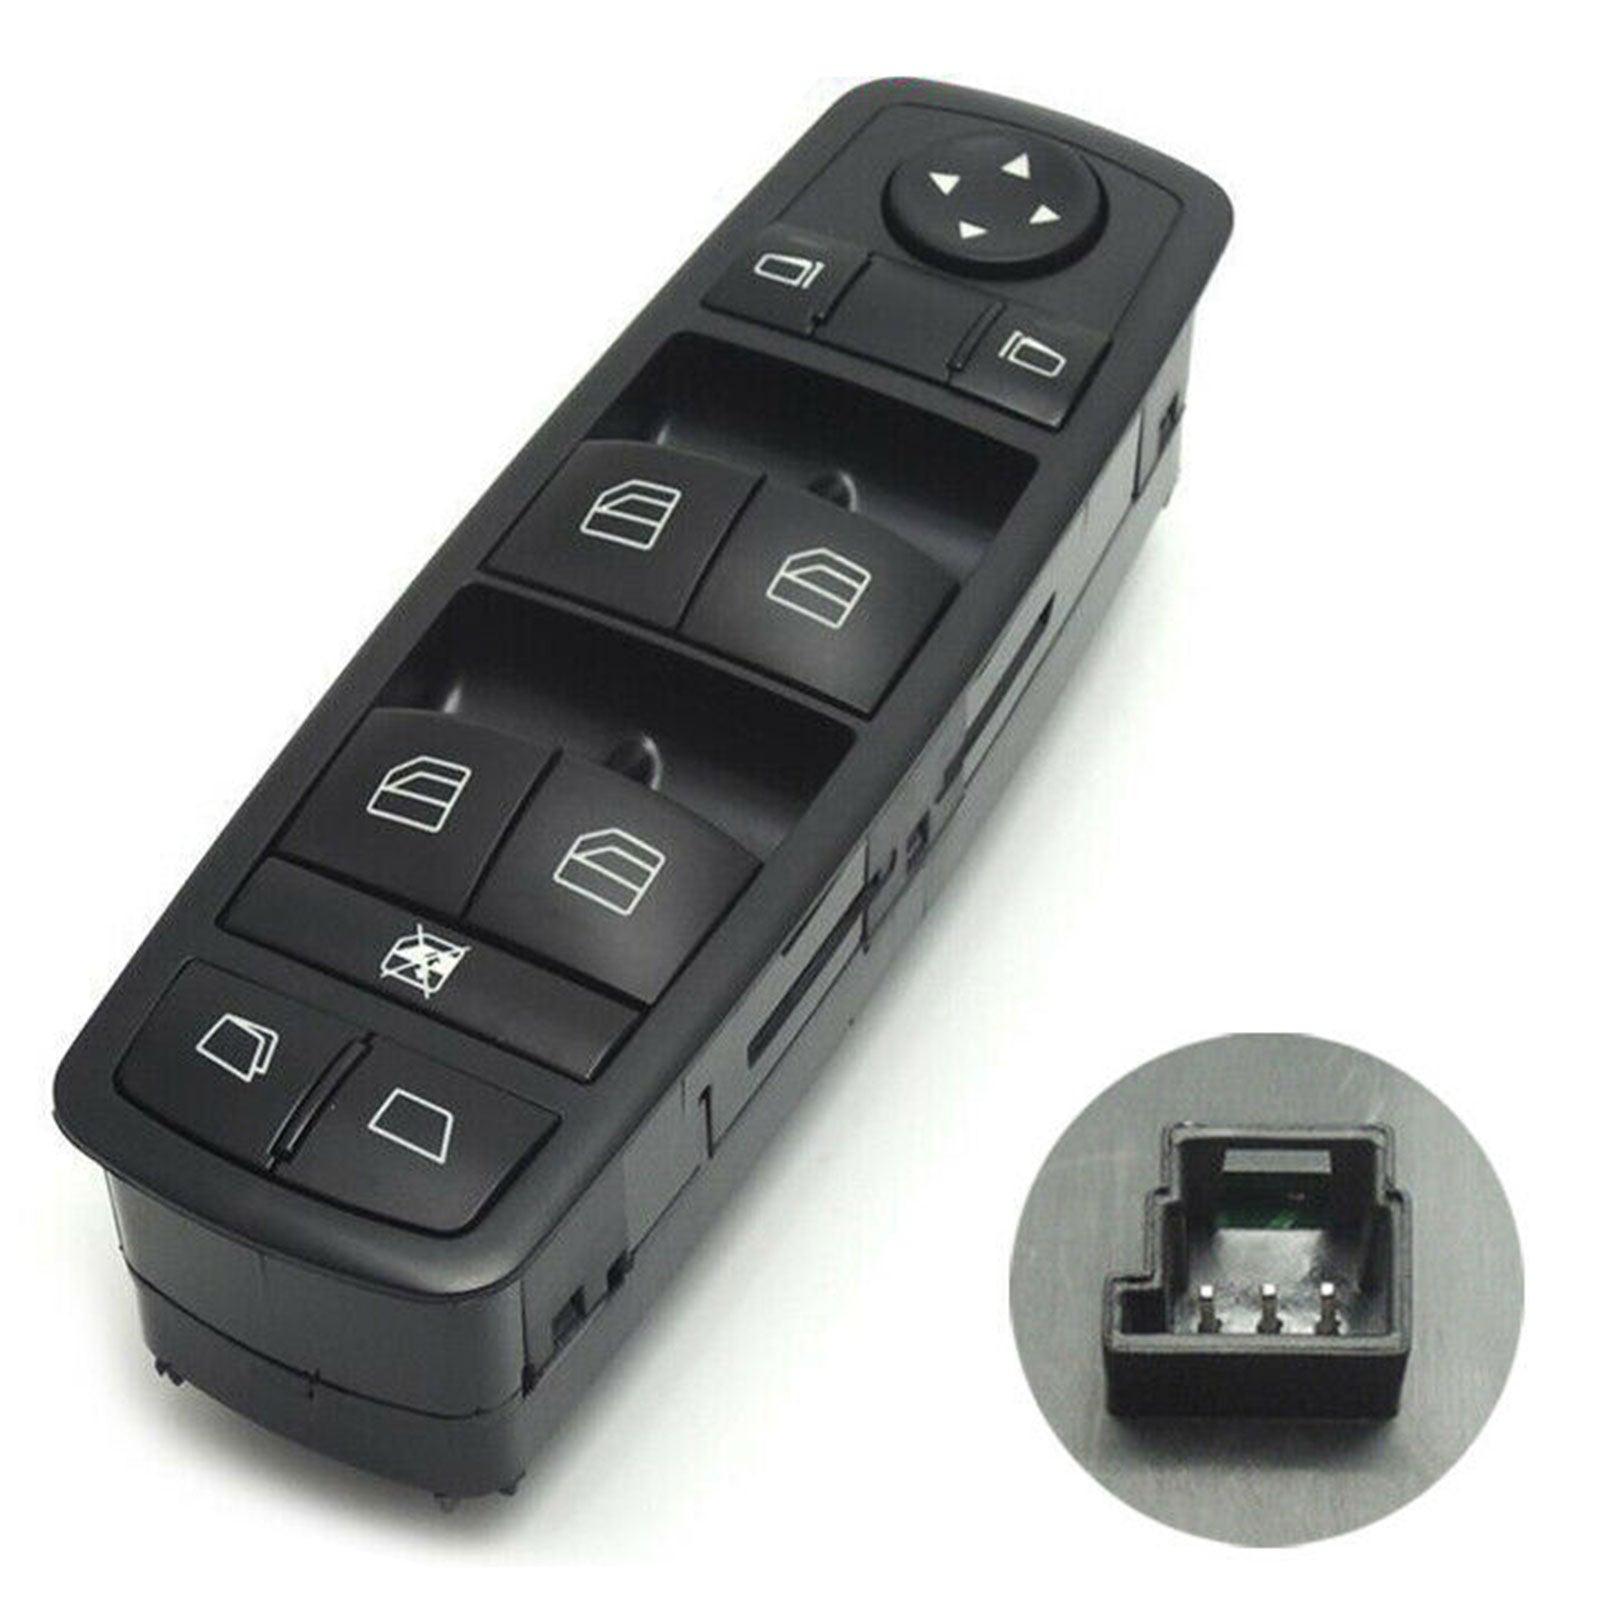 MotorbyMotor Front Left Master Power Window Switch Fits for Mercedes Benz X164/W251/W164 Master Power Window Switch-2518300190 (Driver Side) MotorbyMotor